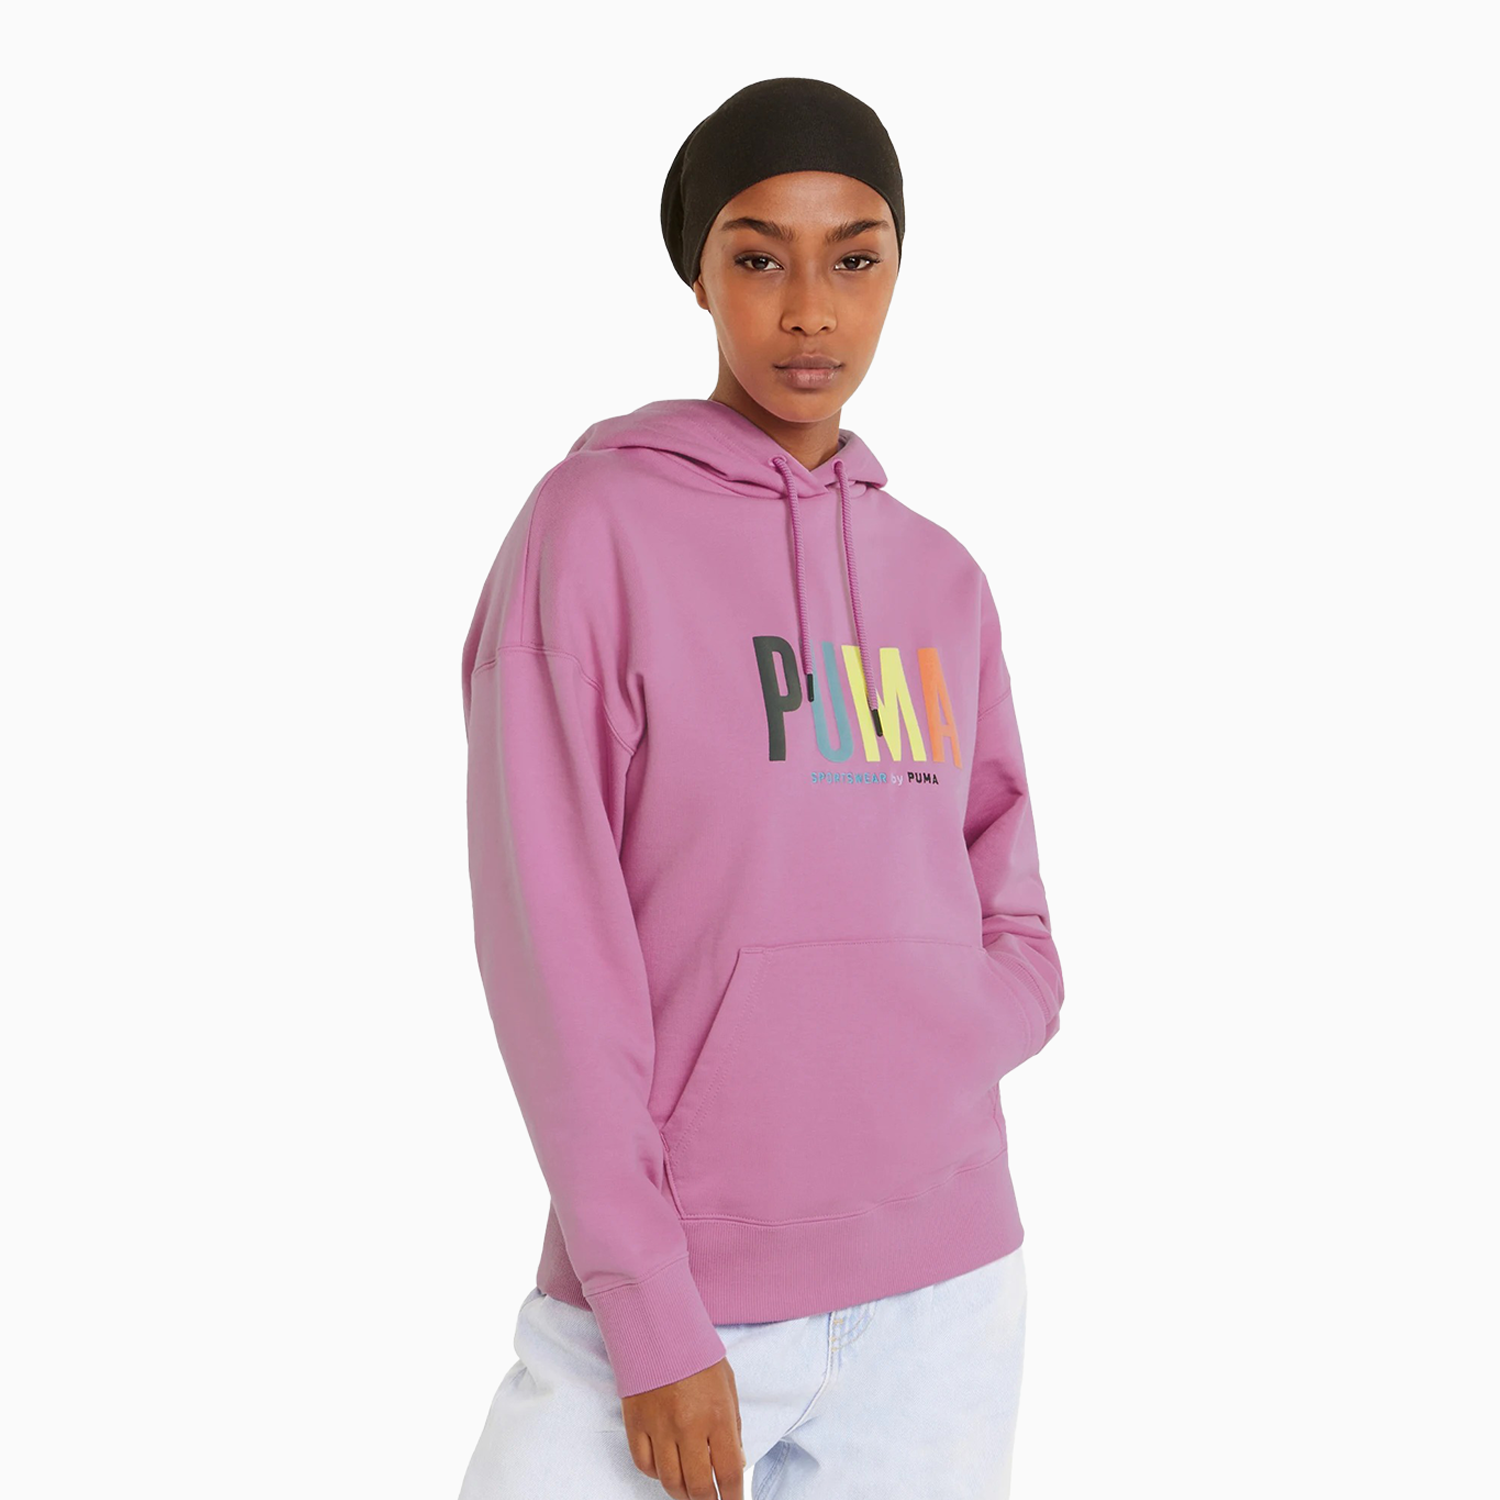 puma-womens-sportswear-graphic-outfit-536015-15-670470-01